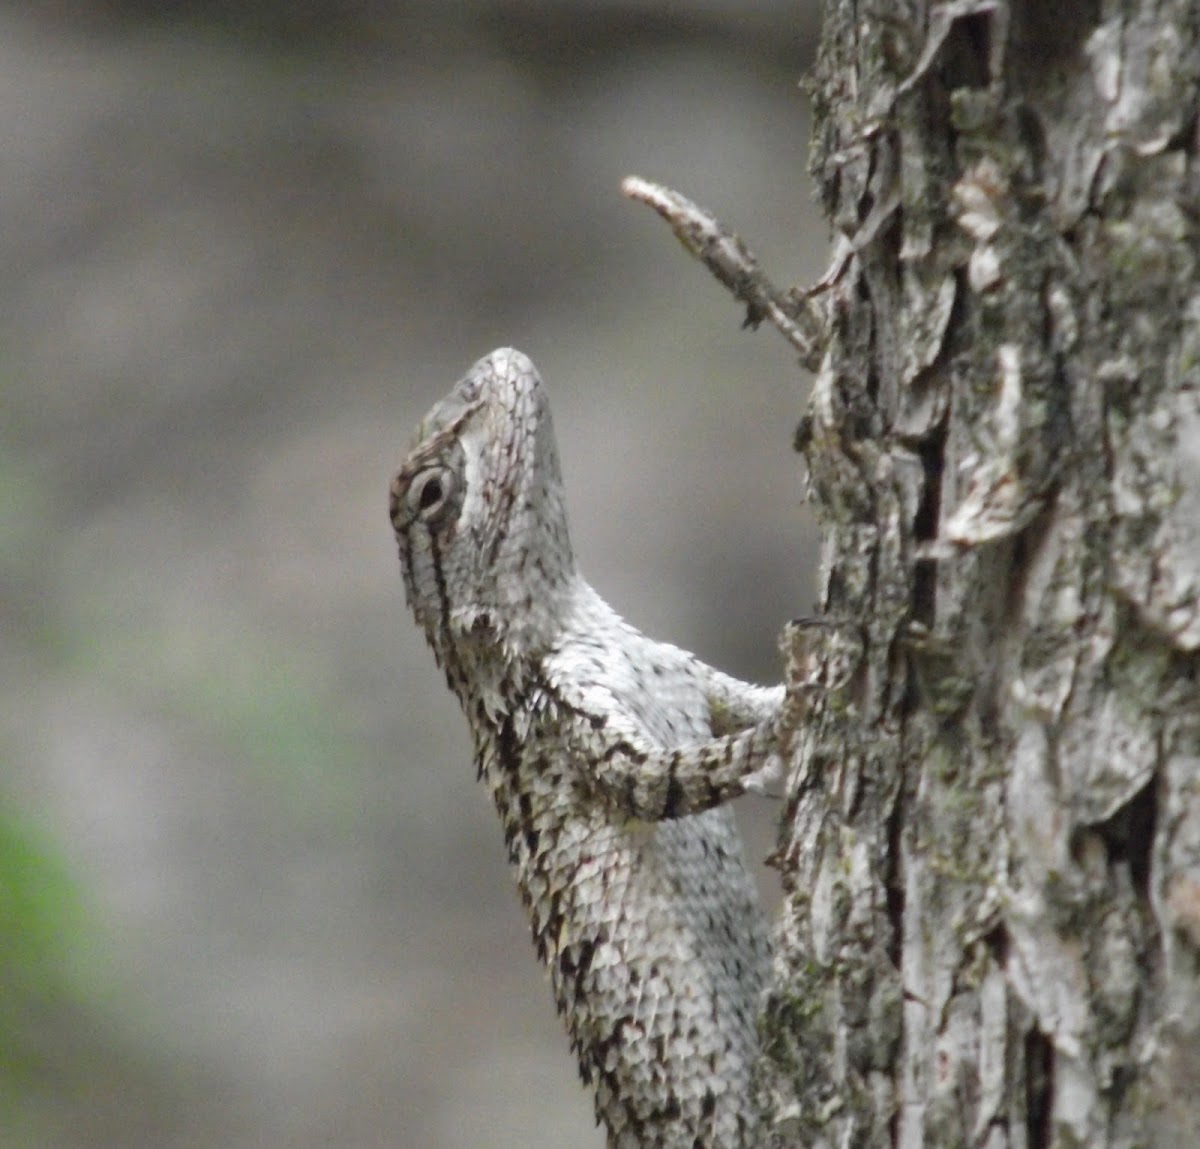 (Yet another) Texas Spiny Lizard